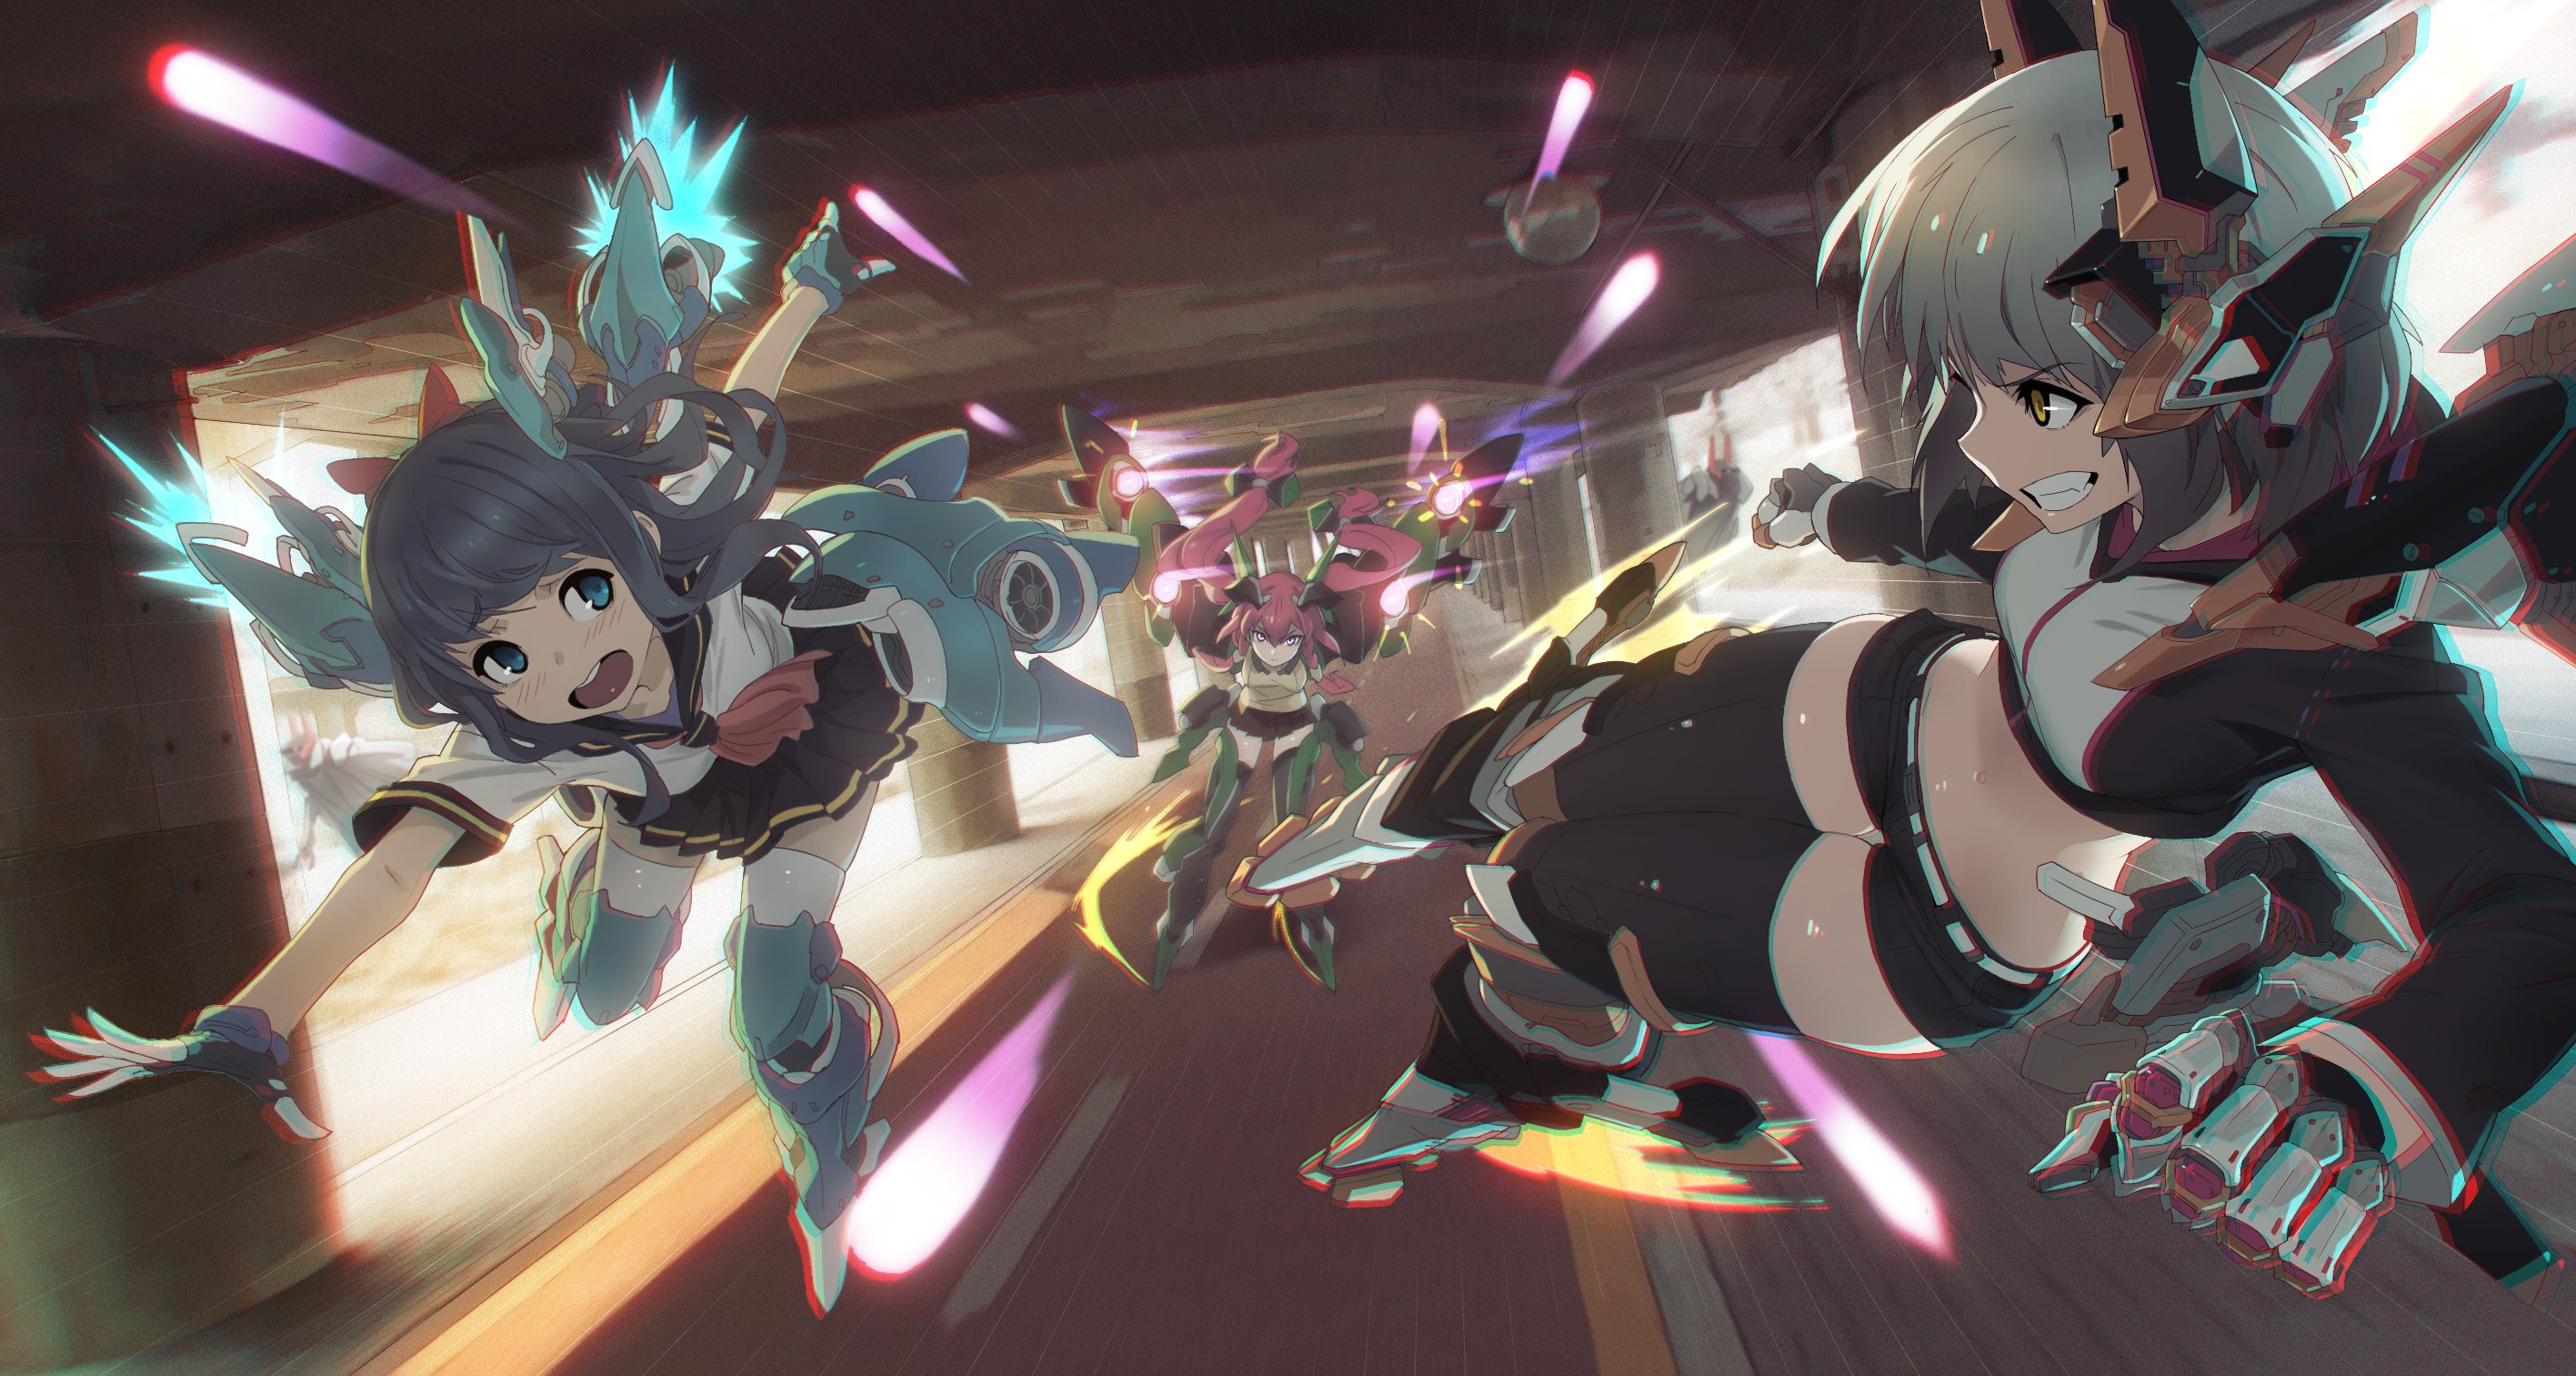 Anime 2833x1513 anime anime girls shooting weapon fantasy weapon flight suits running thigh-highs